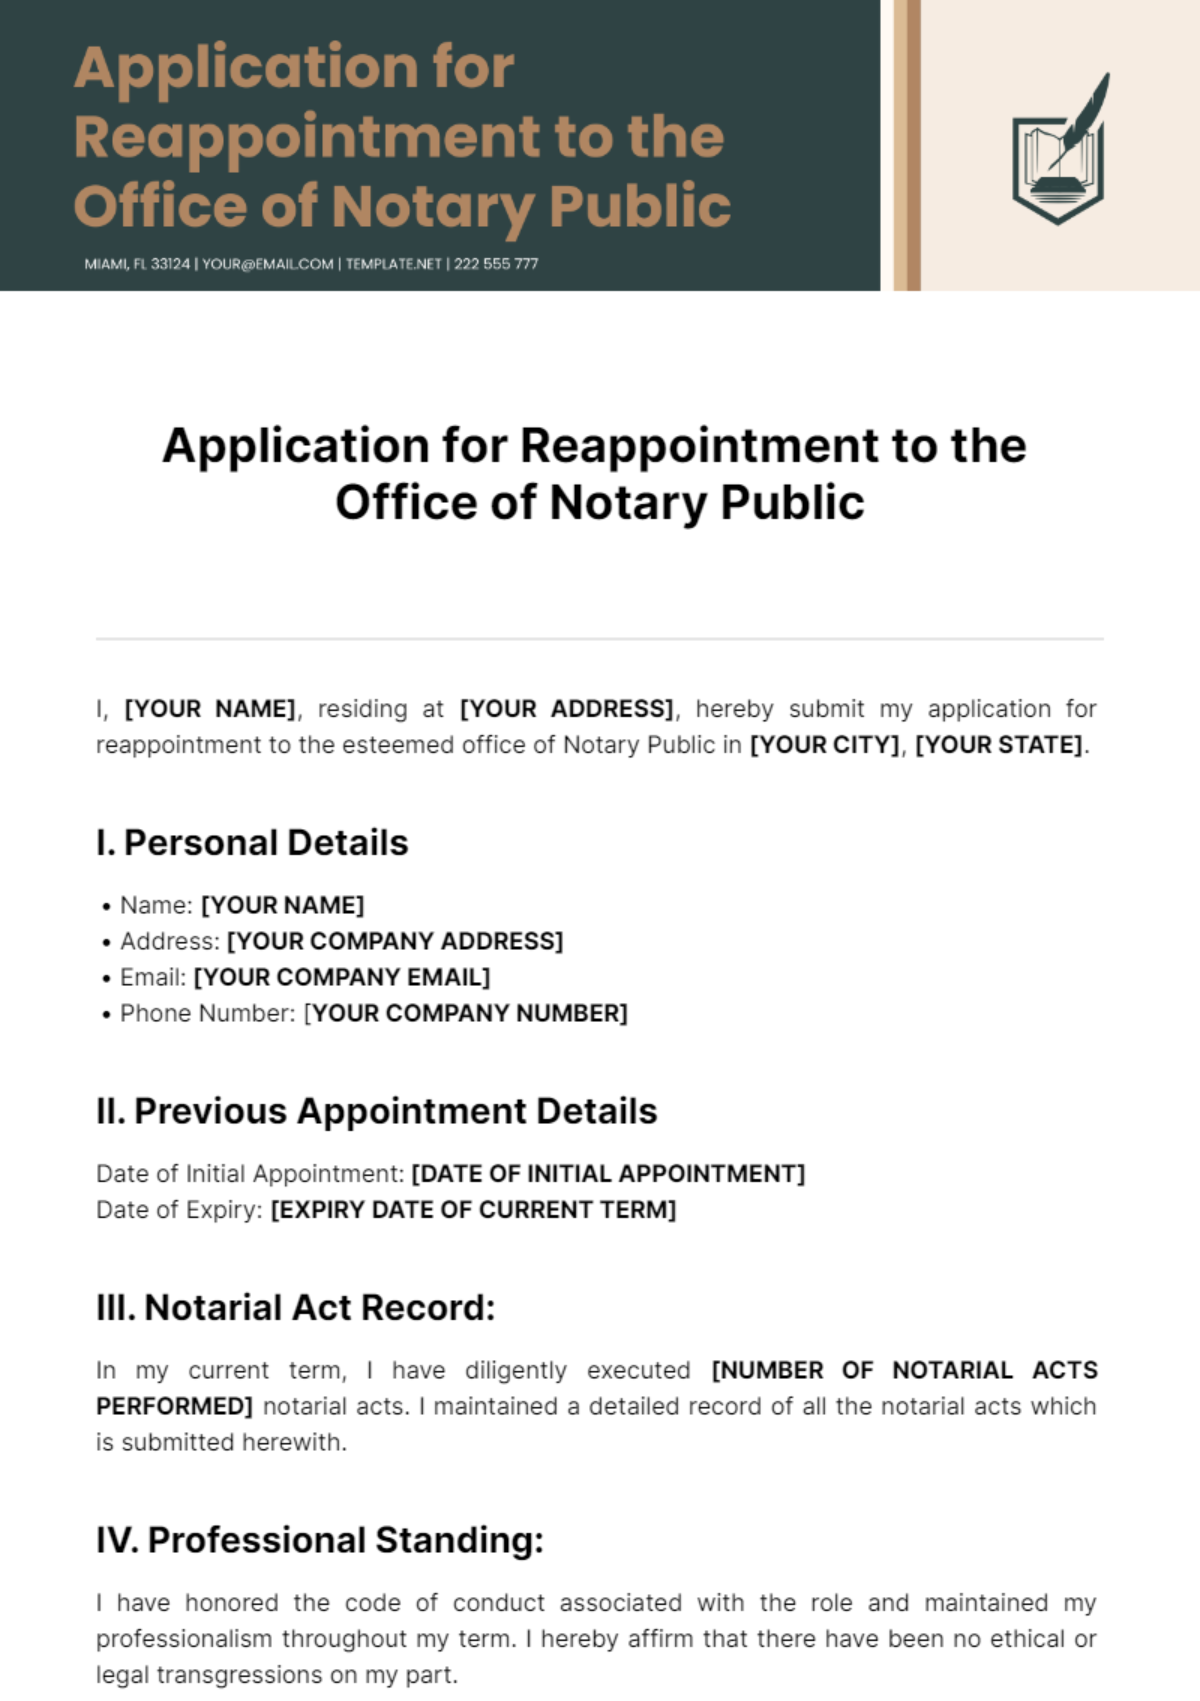 Application For Reappointment To Office Of Notary Public Template